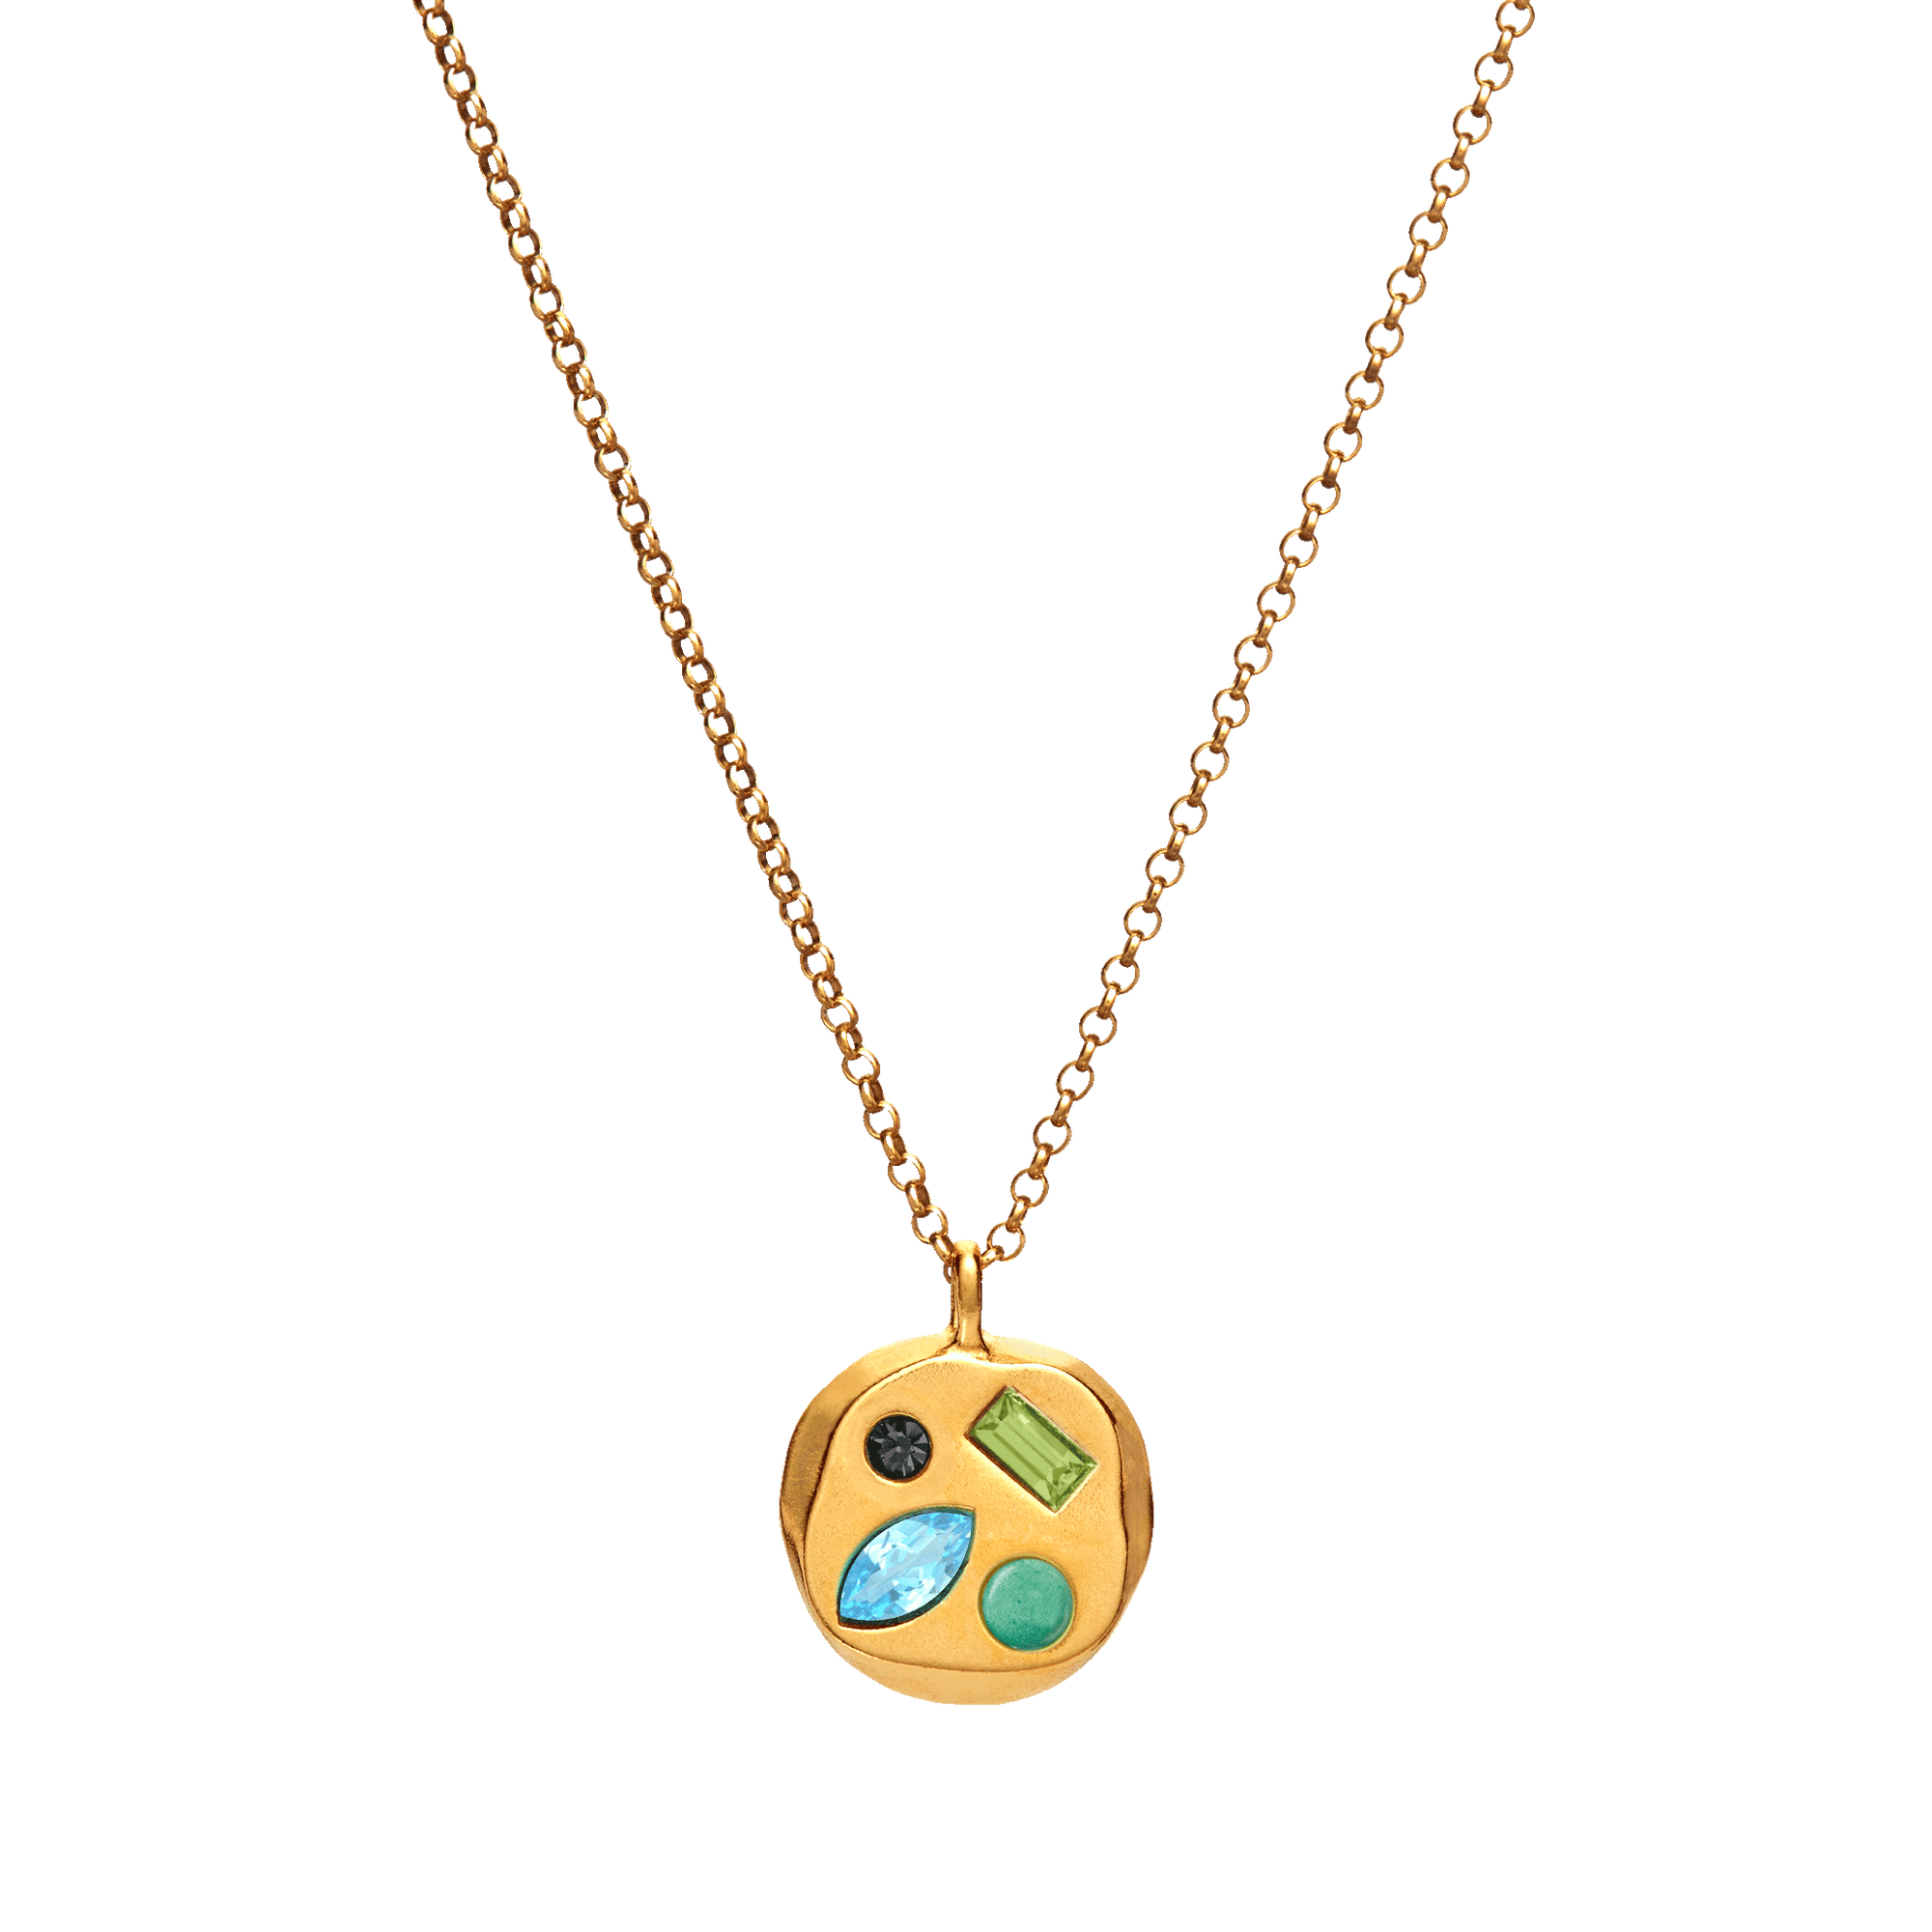 The December Fifth Pendant